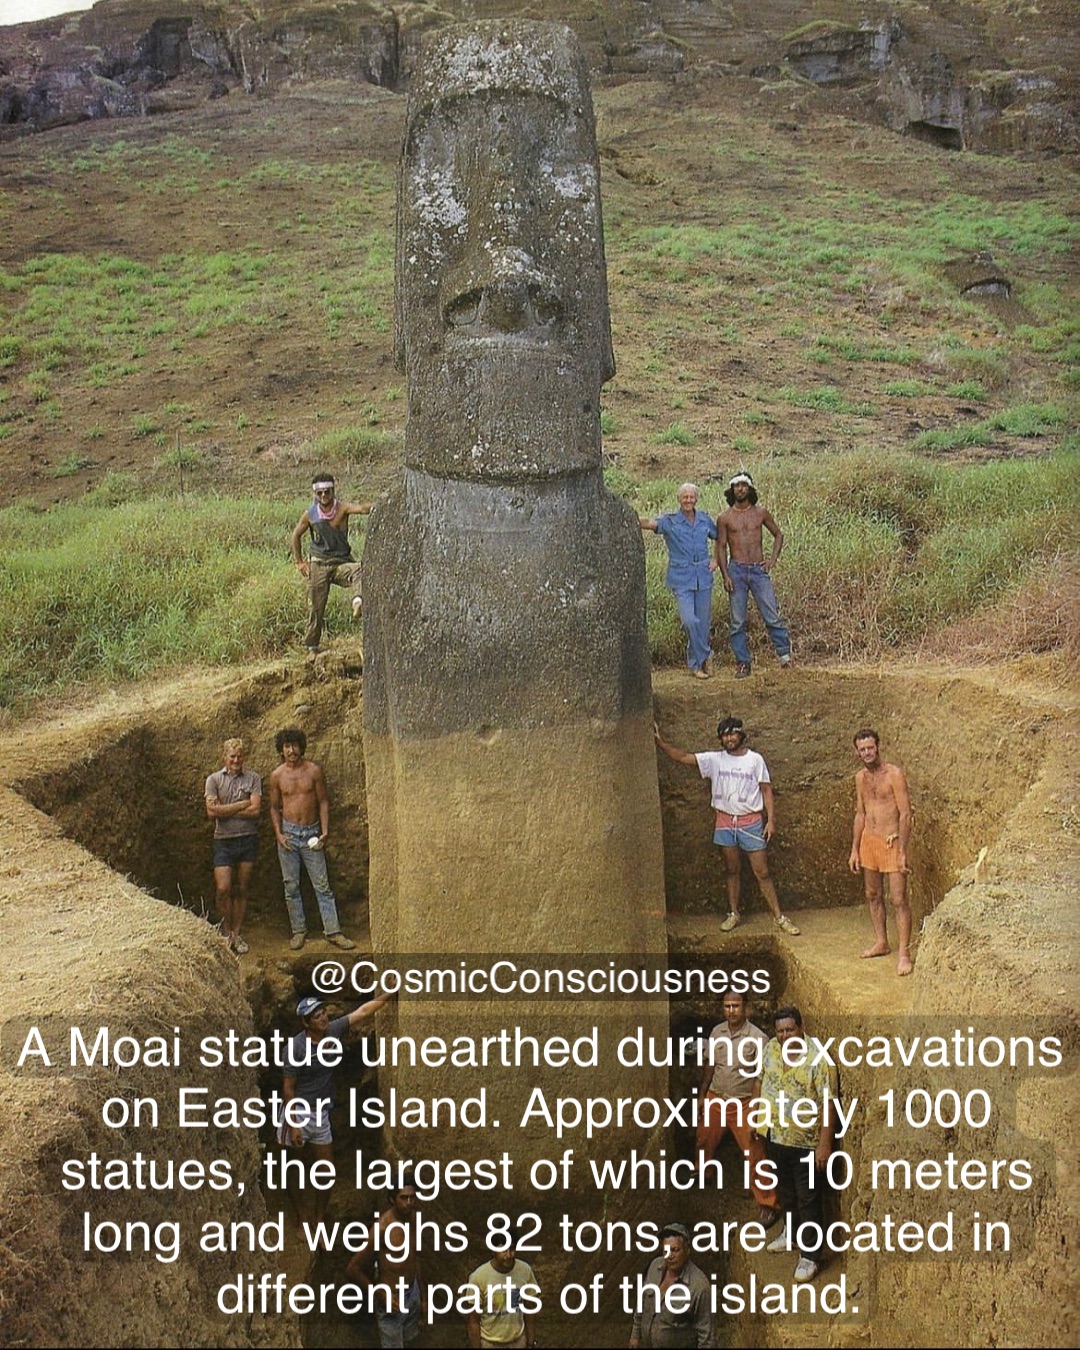 A Moai statue unearthed during excavations on Easter Island. Approximately 1000 statues, the largest of which is 10 meters long and weighs 82 tons, are located in different parts of the island. @CosmicConsciousness